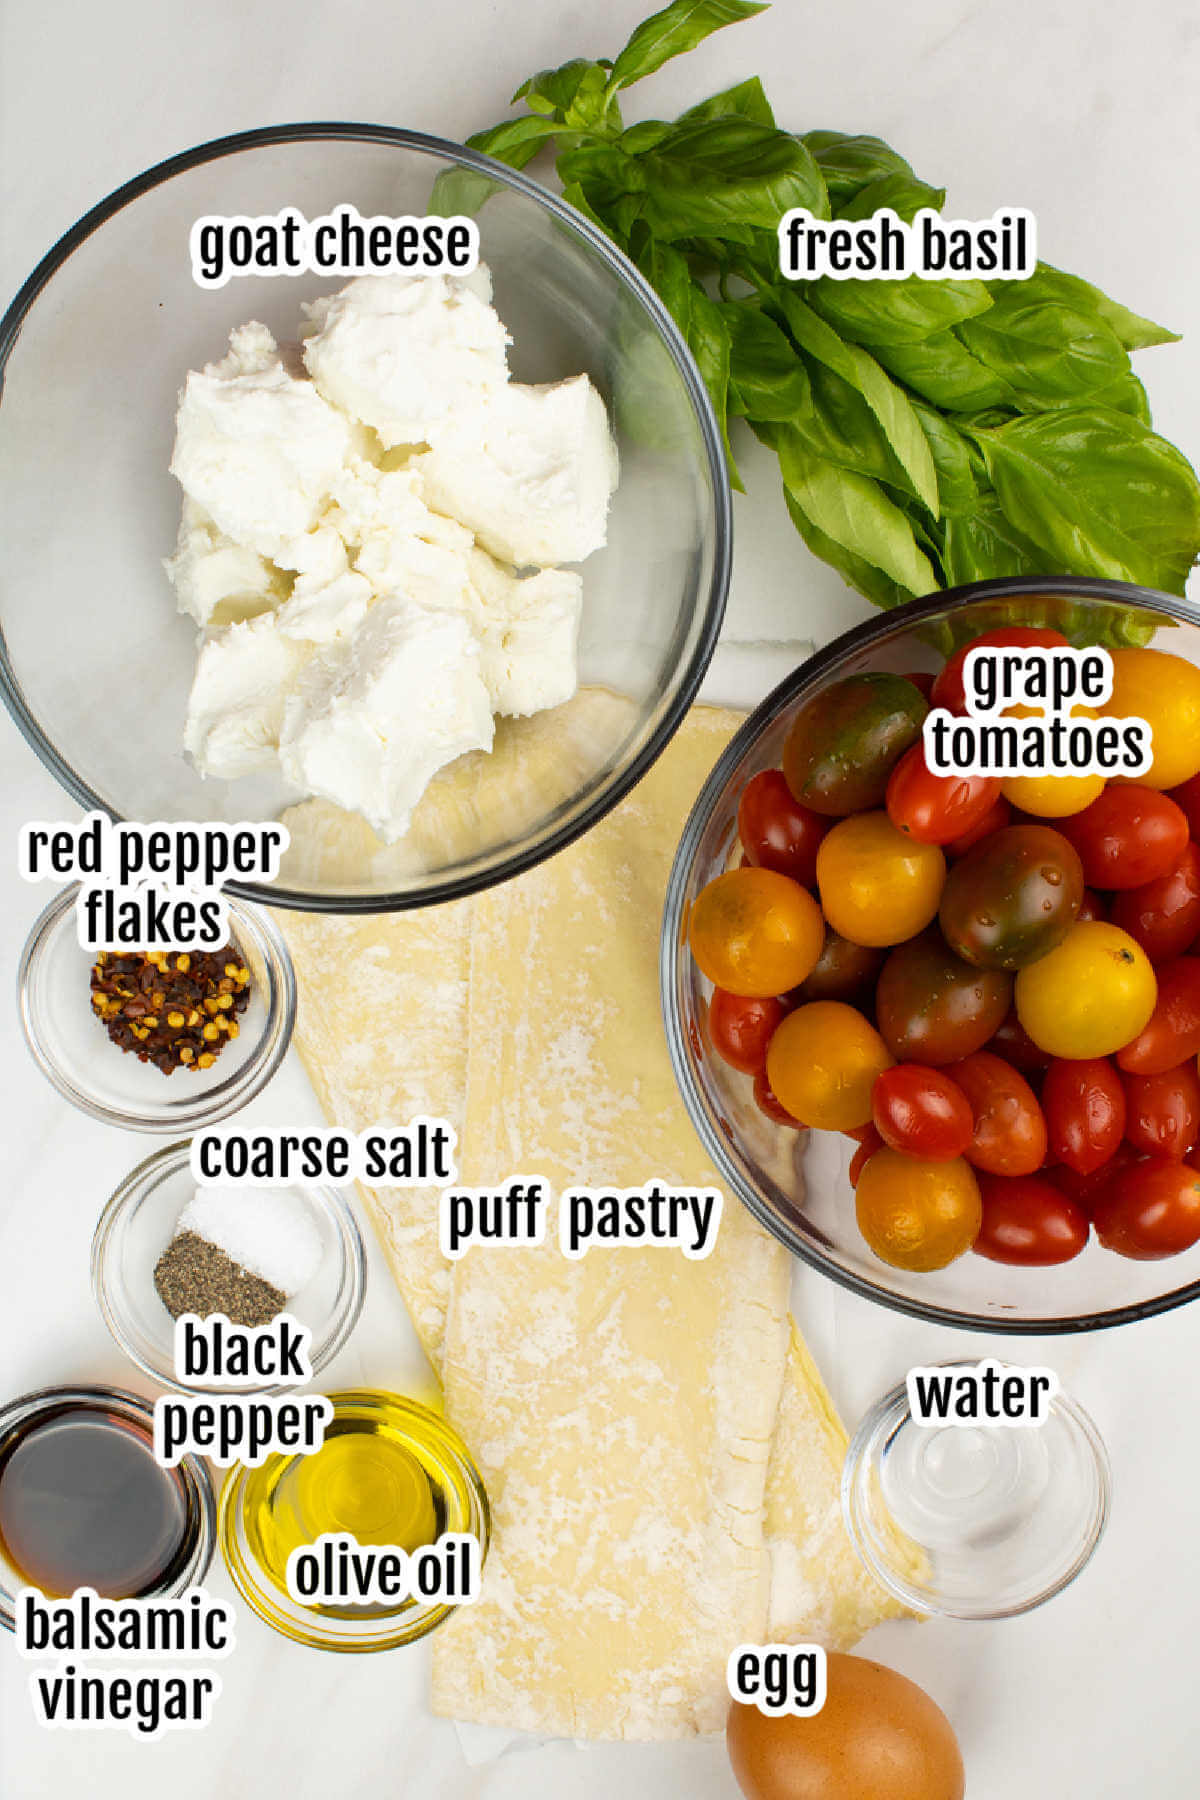 Ingredients needed to make a puff pastry pizza with grape tomatoes and goat cheese. 